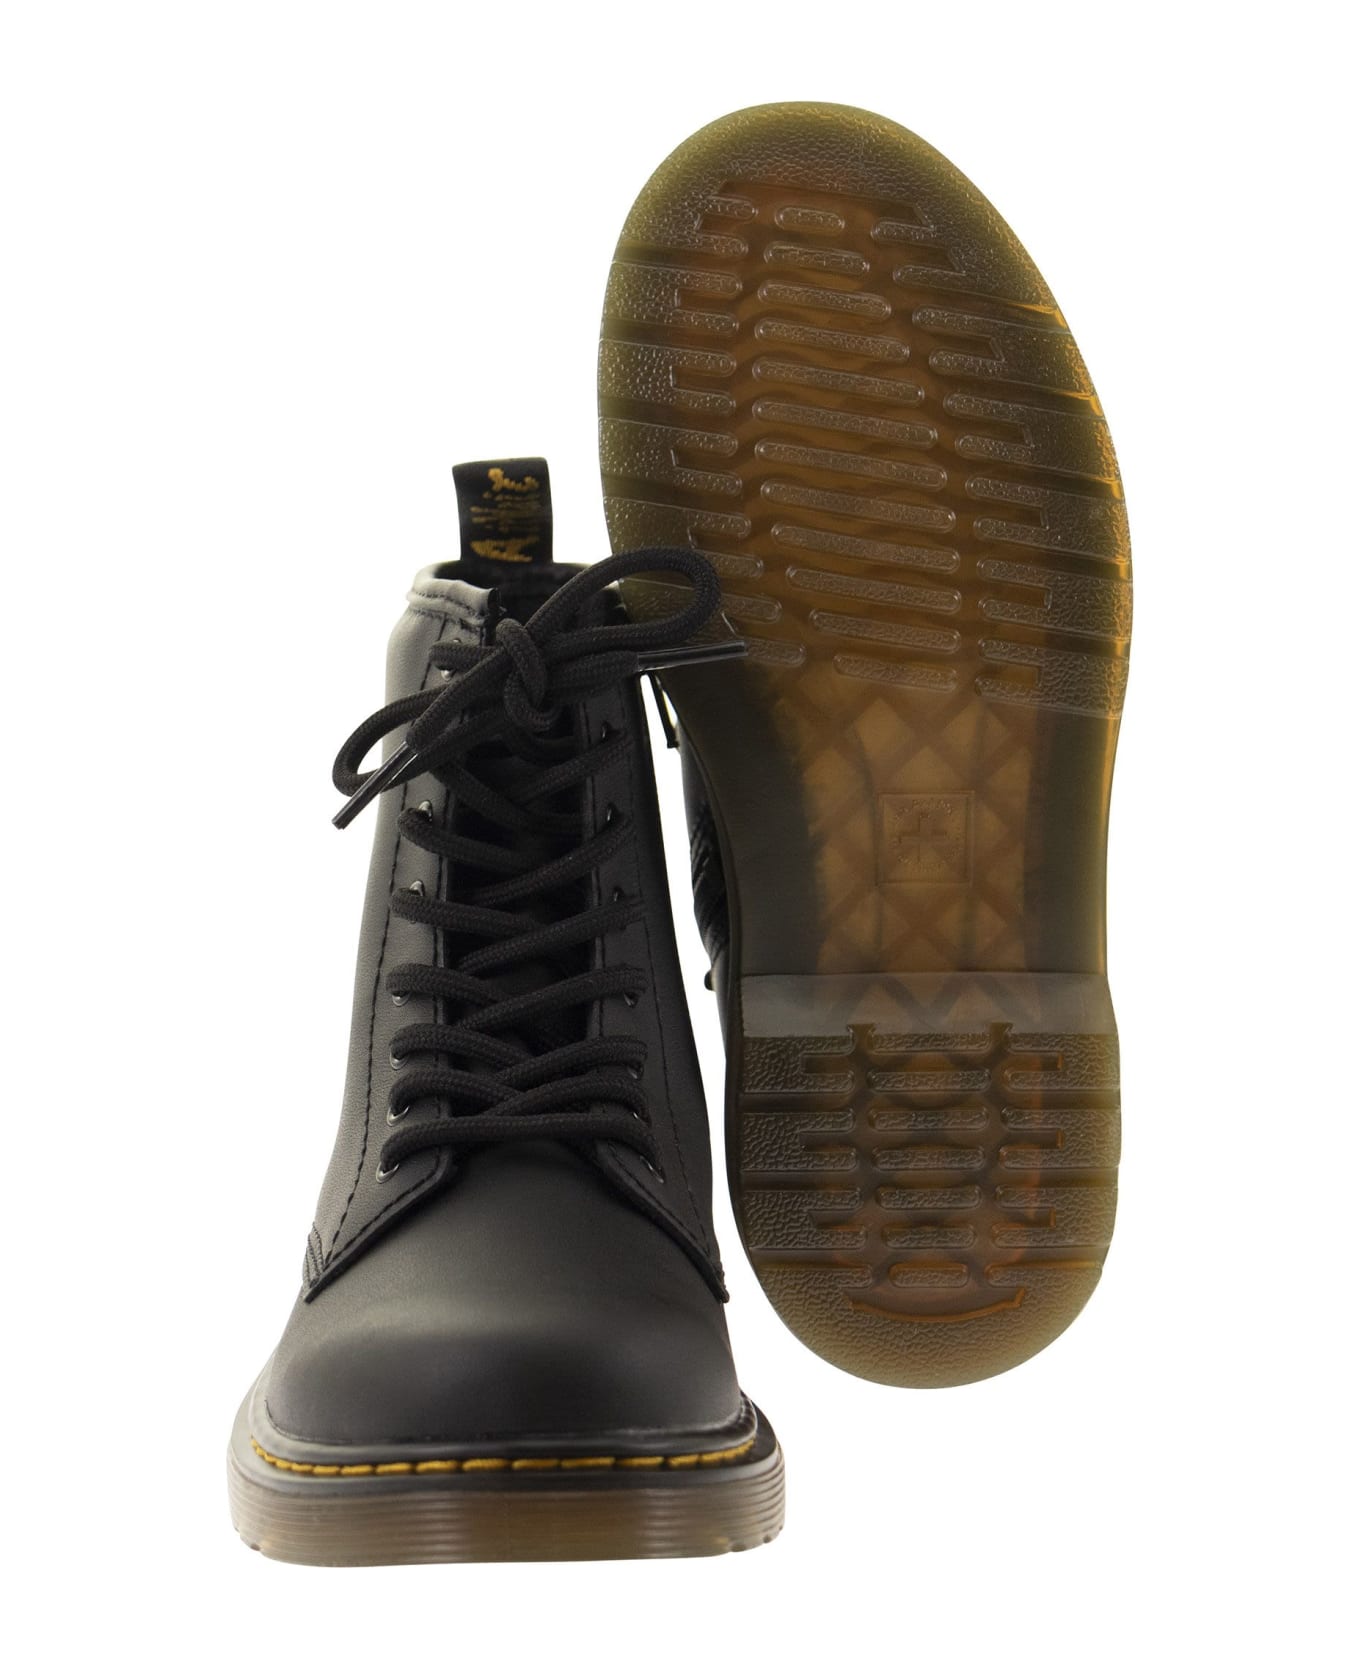 Dr. Martens 8-eye Leather Ankle Boot 1460 - Black